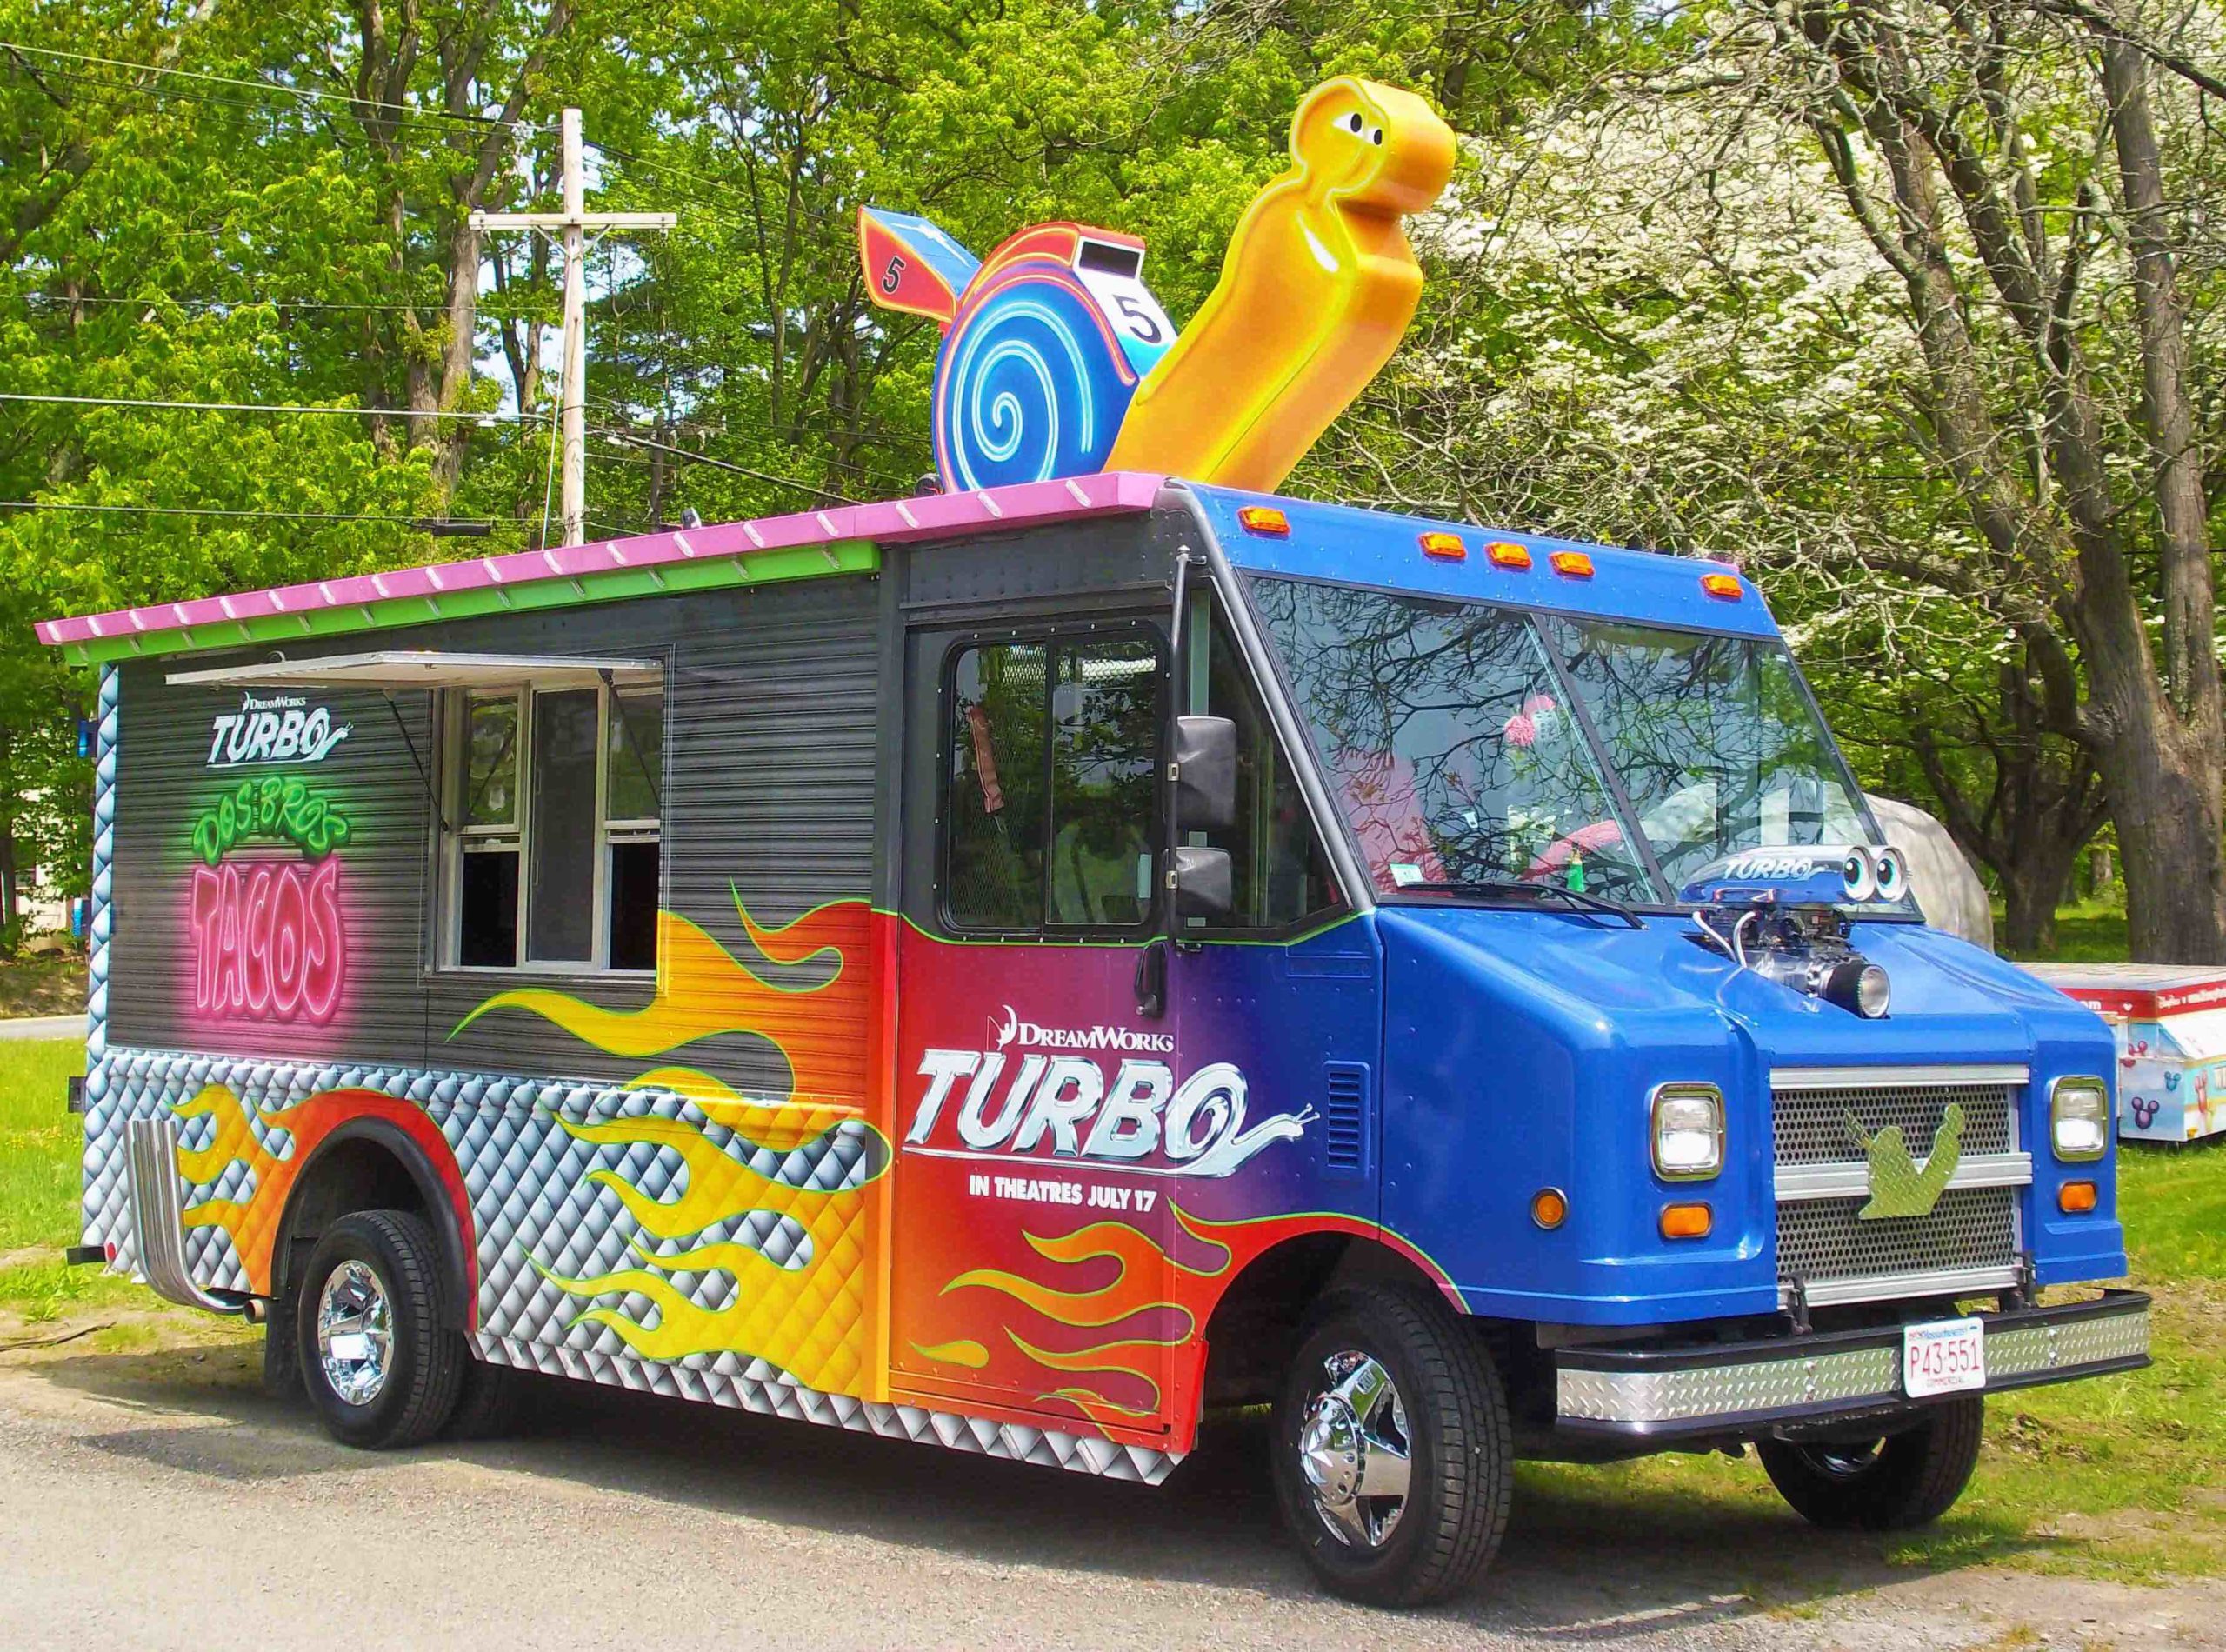 Turbo Food Truck built by Turtle Transit